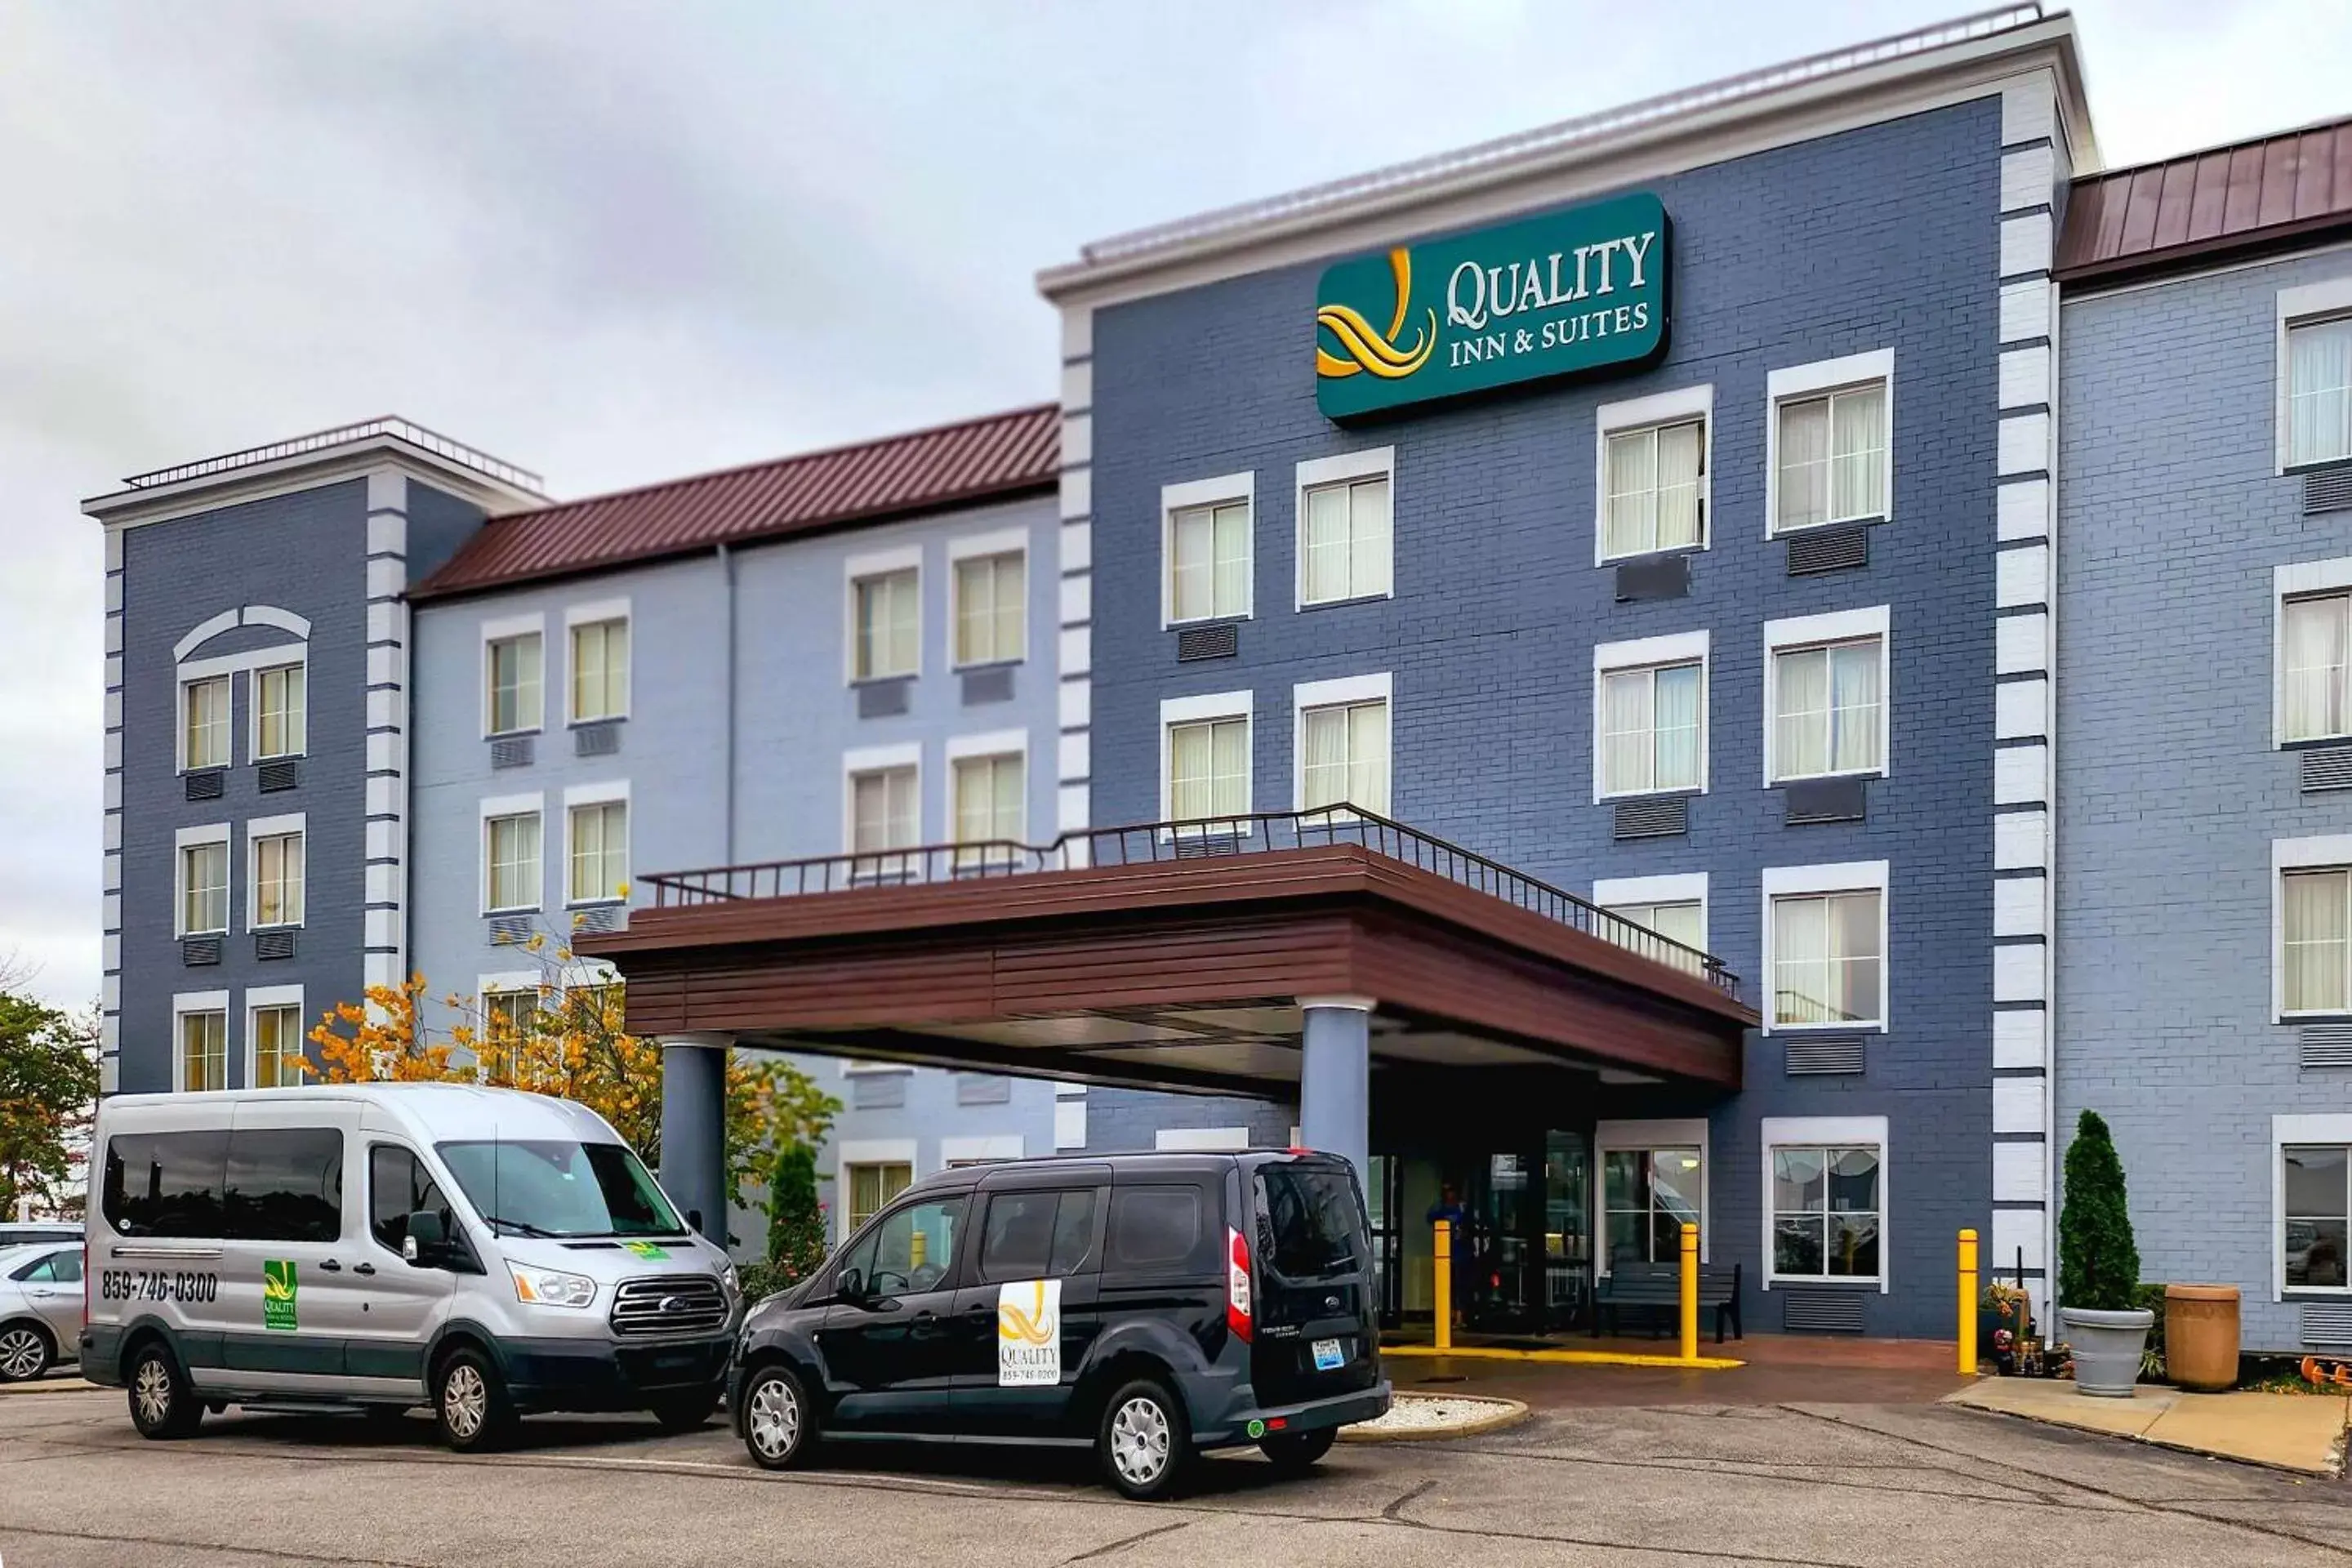 Property Building in Quality Inn & Suites CVG Airport